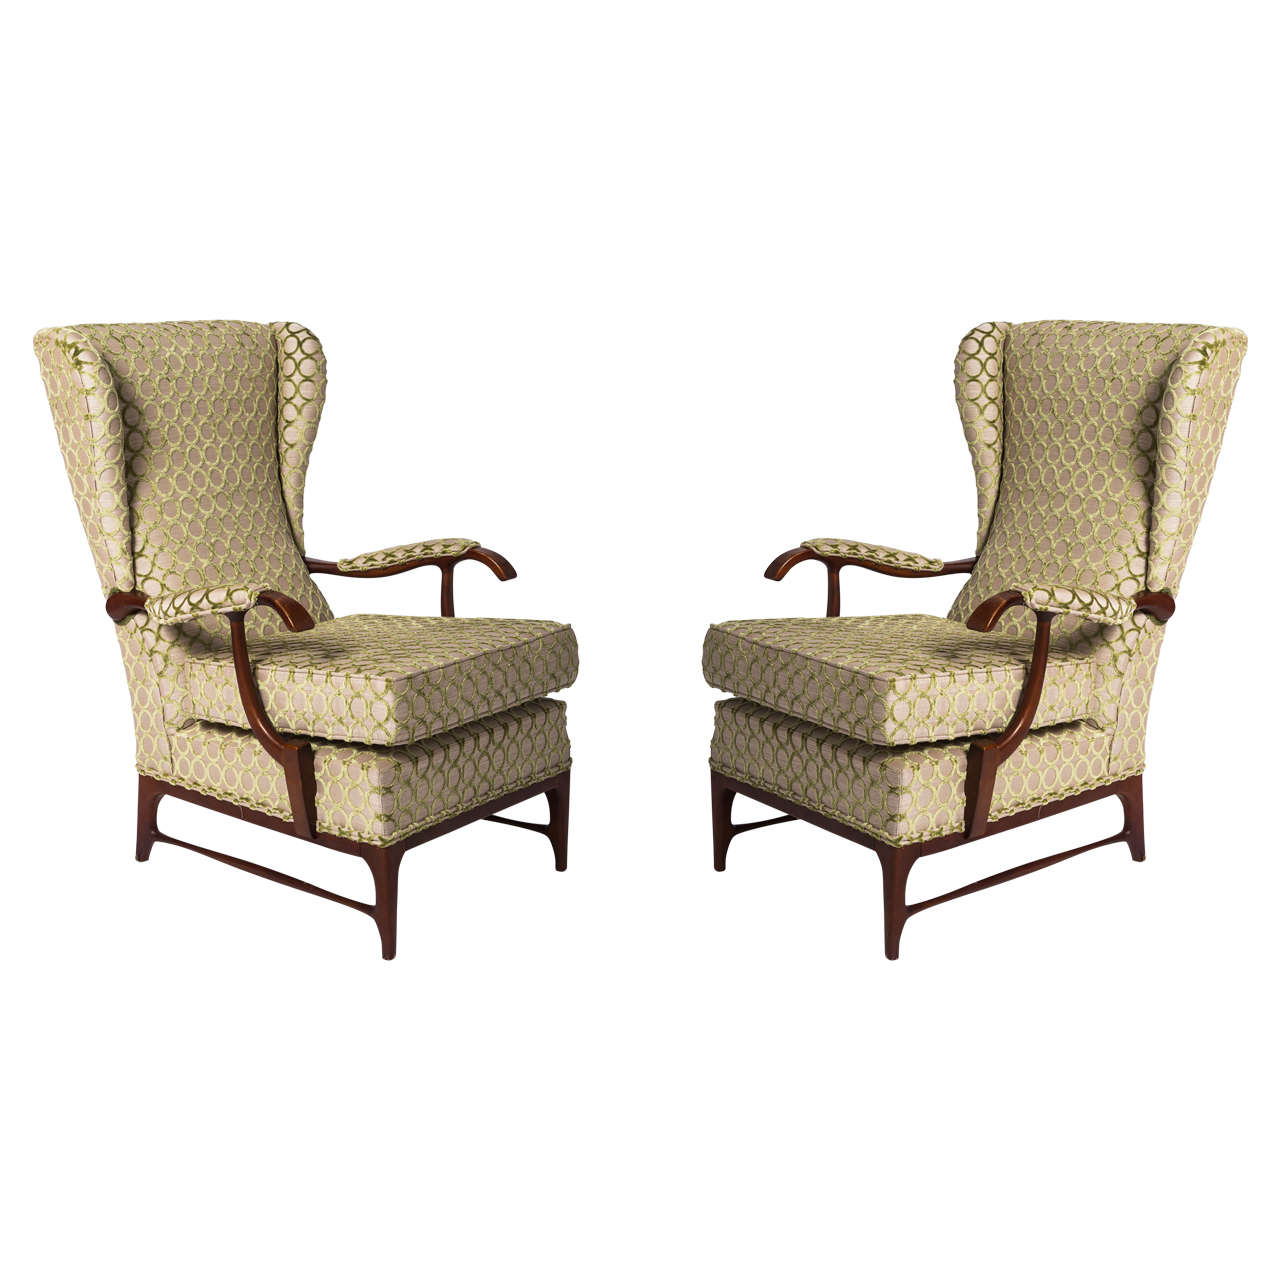 Paolo Buffa attributed pair of beech wood armchairs, Italy circa 1940